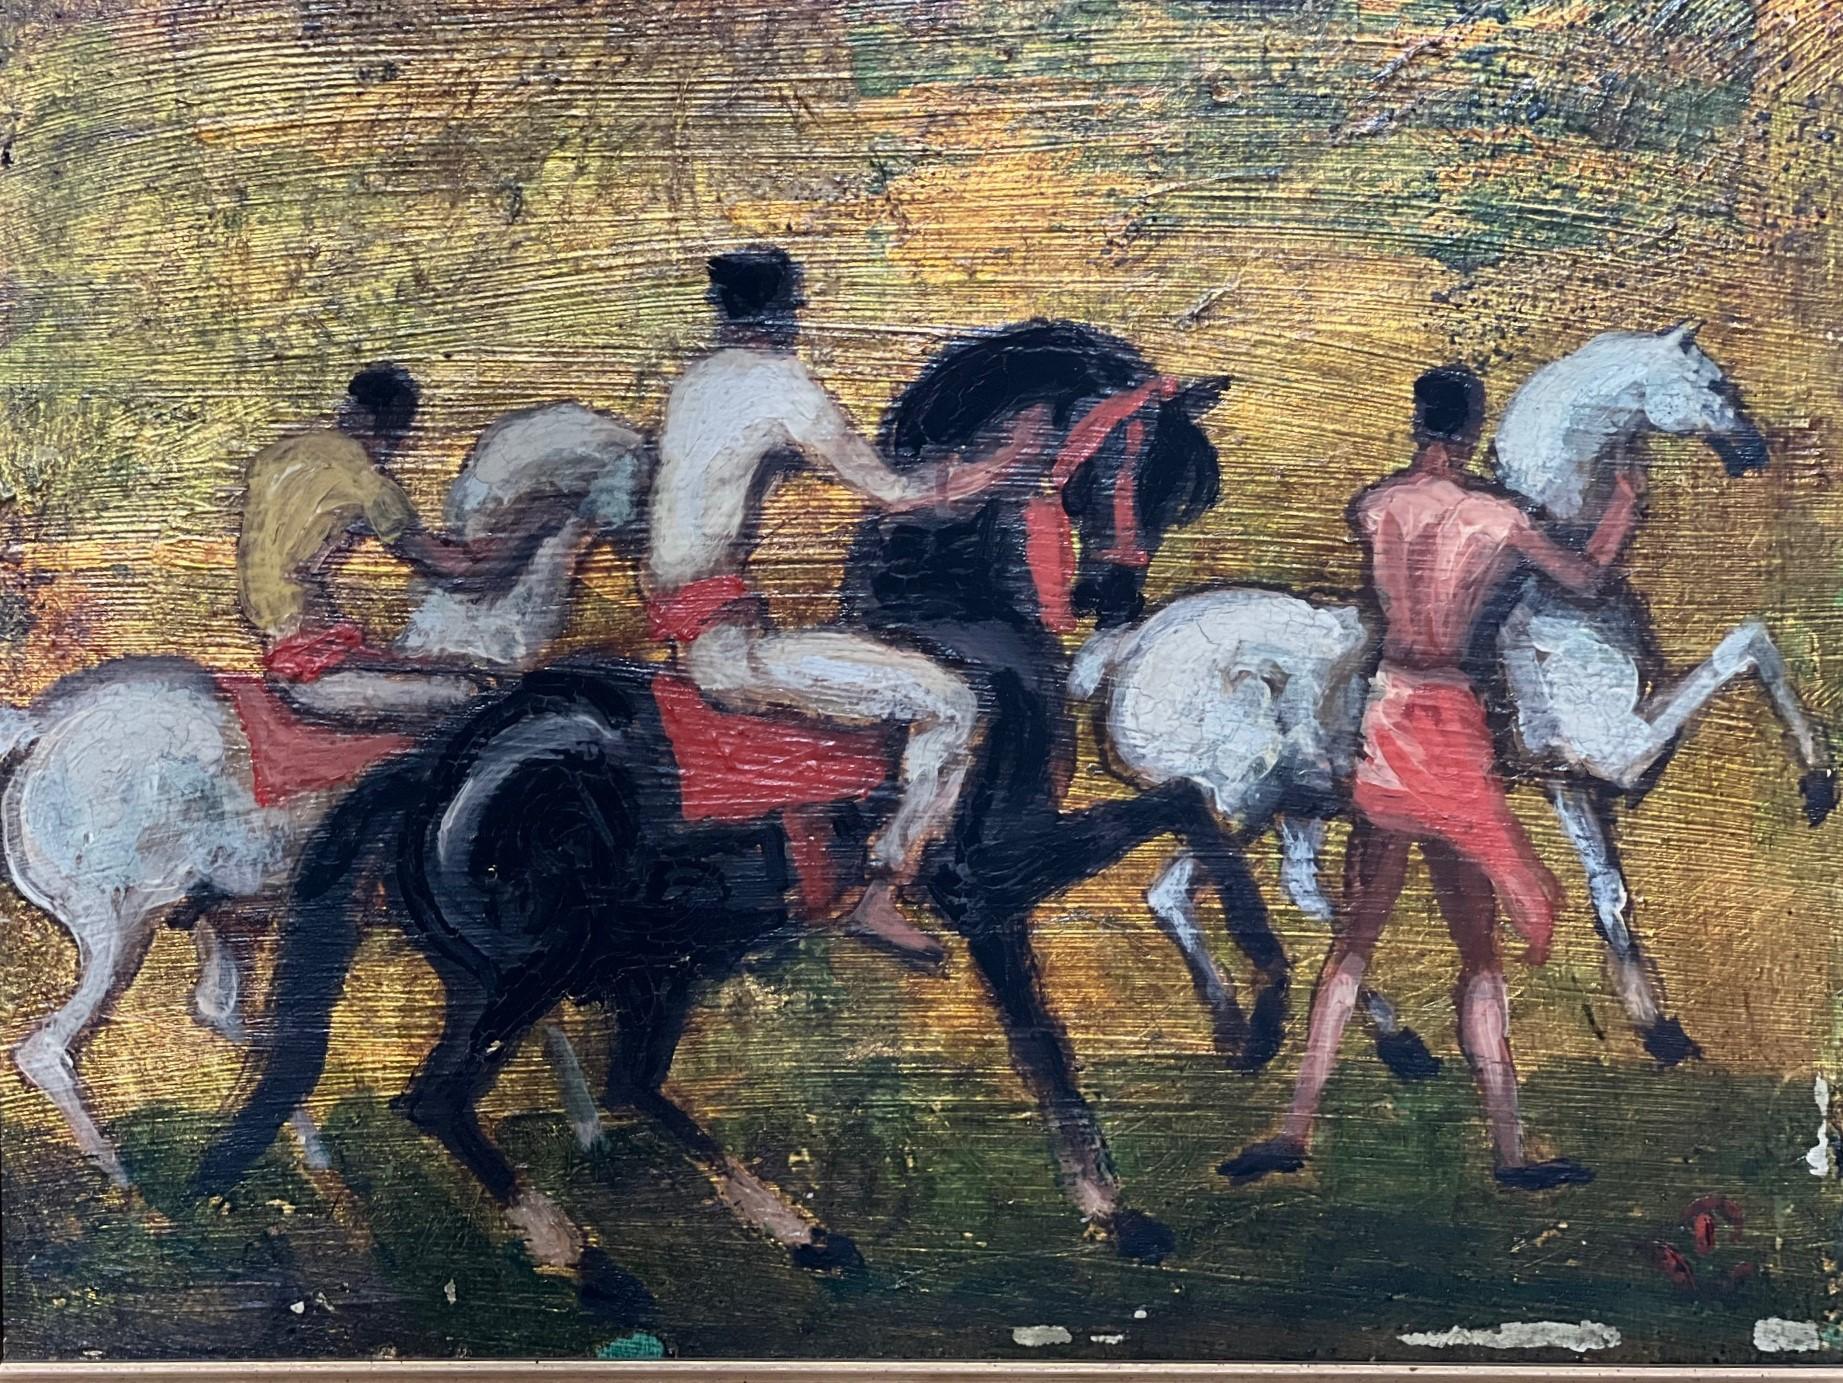 American intra-war artist and illustrator Porter Woodruff (1894-1959). Arabian Horses and Riders, oil on board with chalky gouache. Signed Porter Woodruff Hammamet 1958 in pencil on the back. Indistinct PW on lower right of painting.

His Art